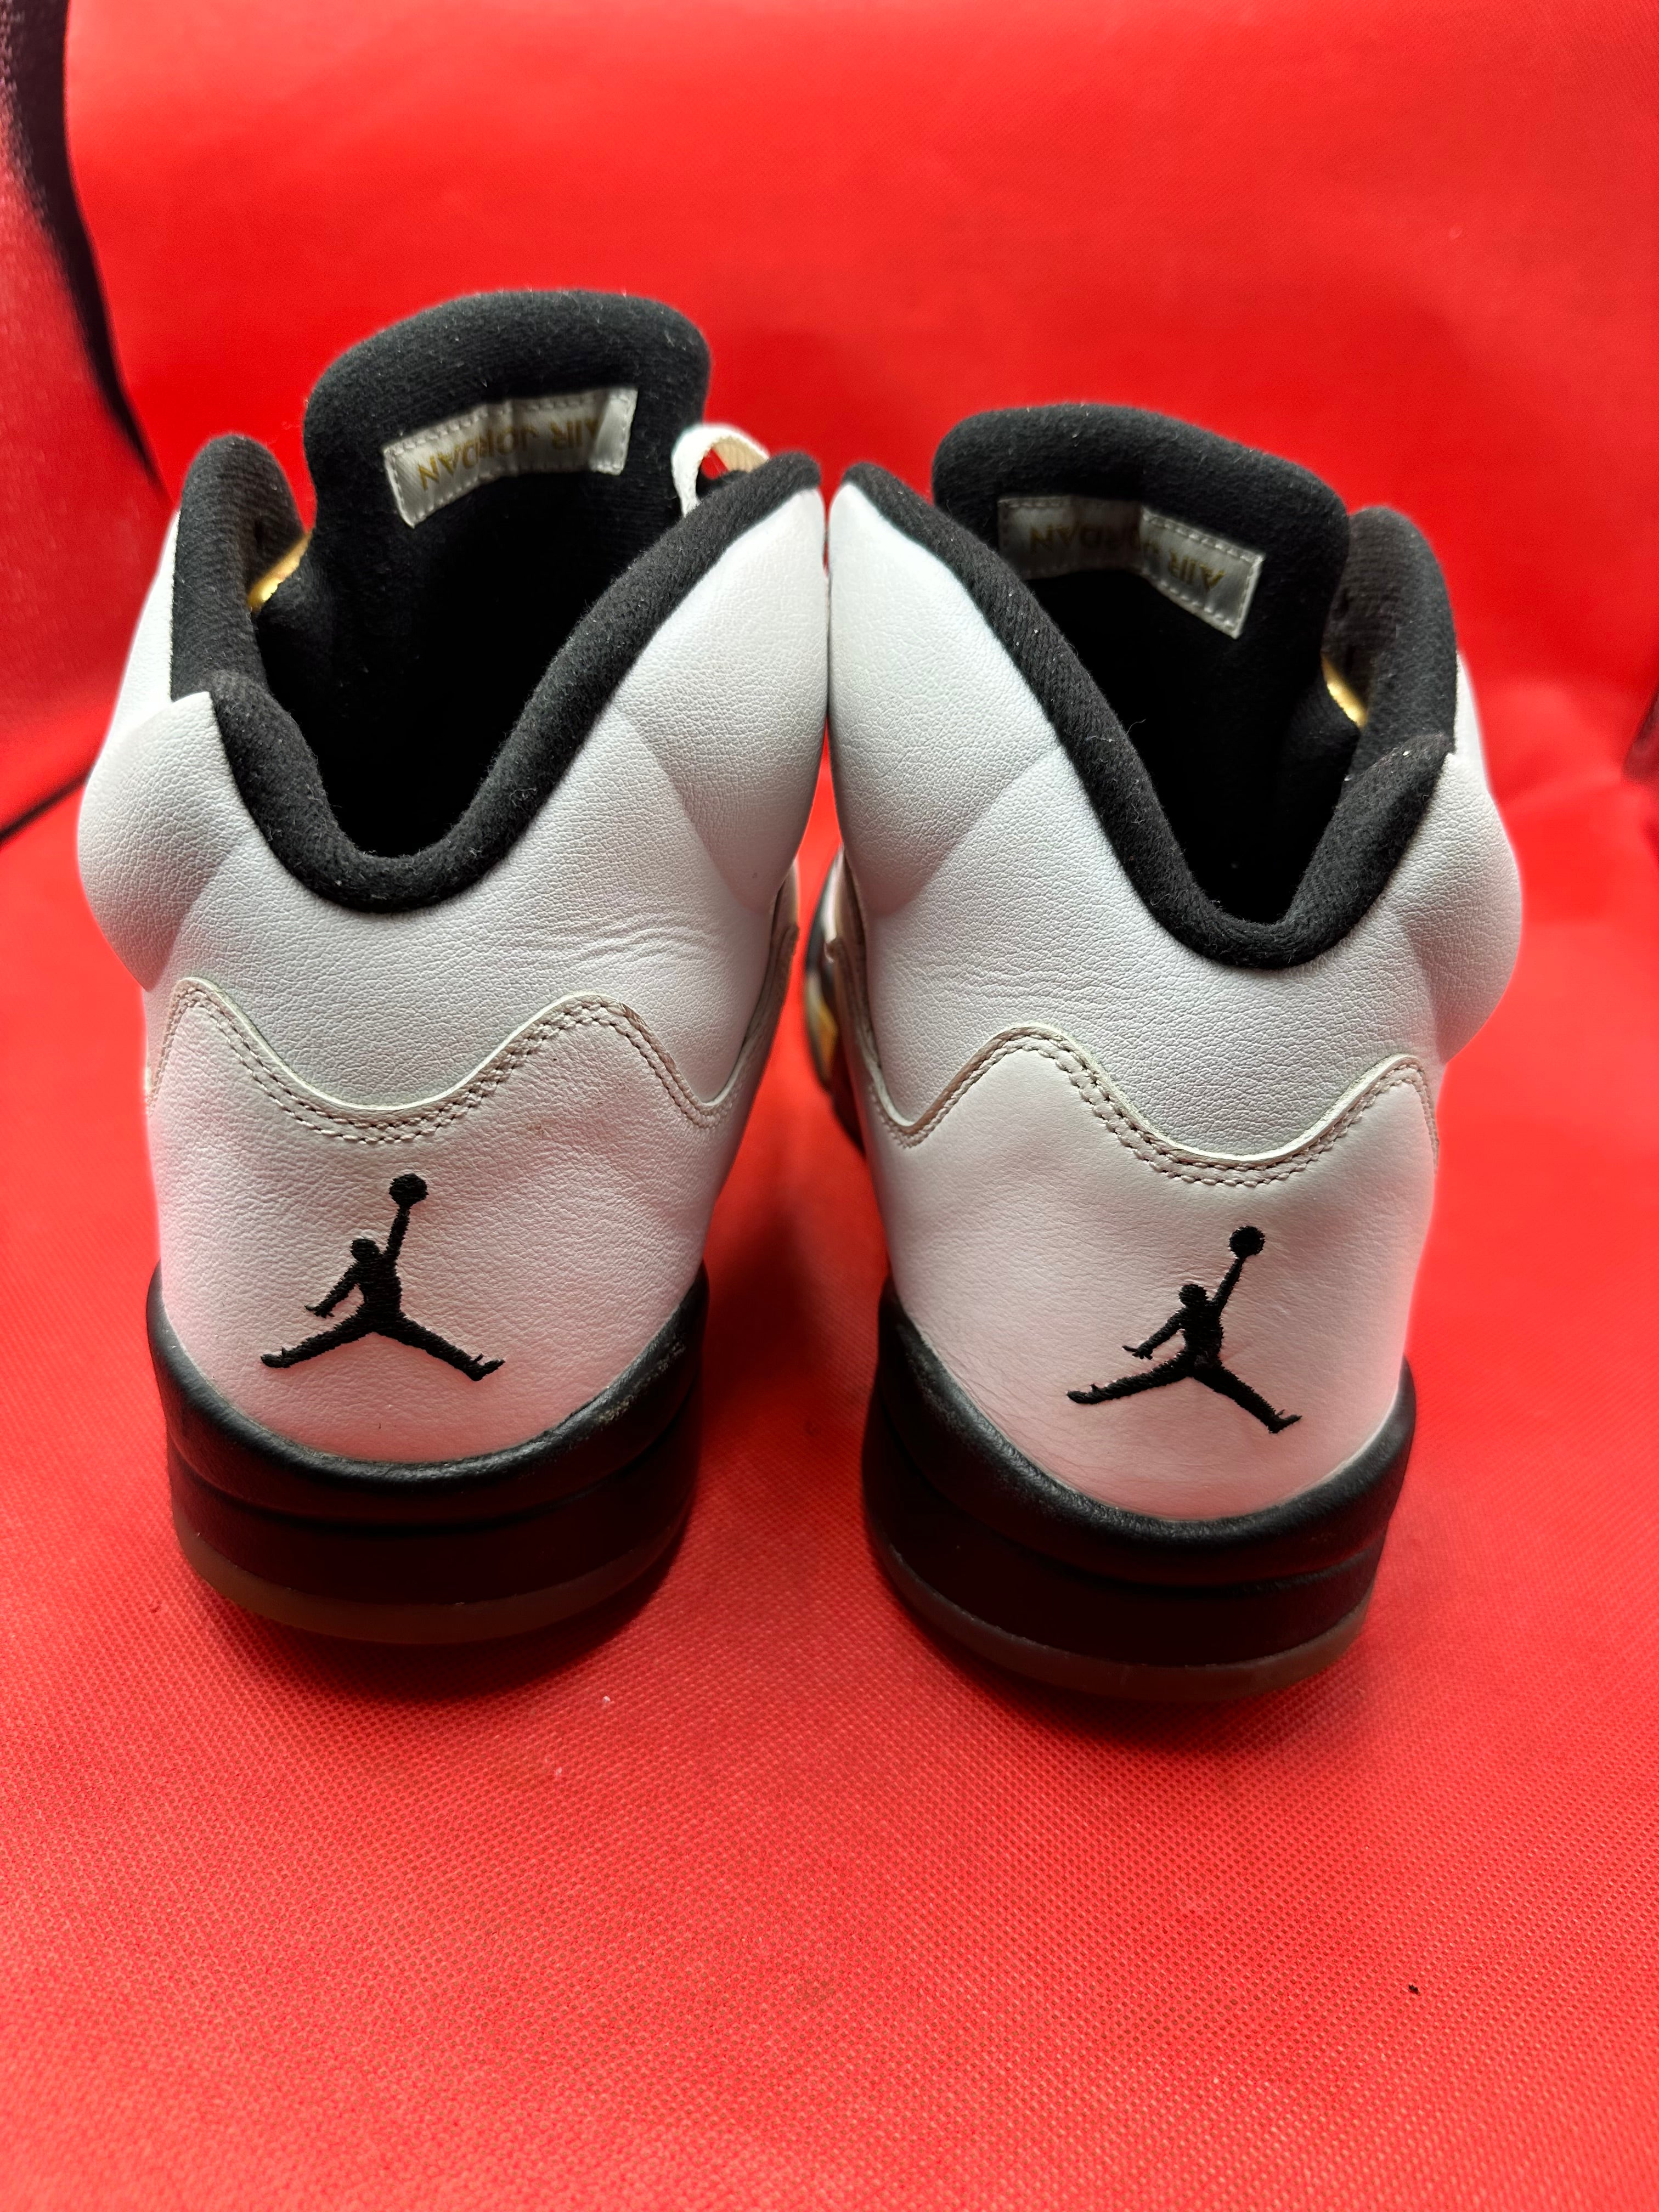 Olympic 5s size 14